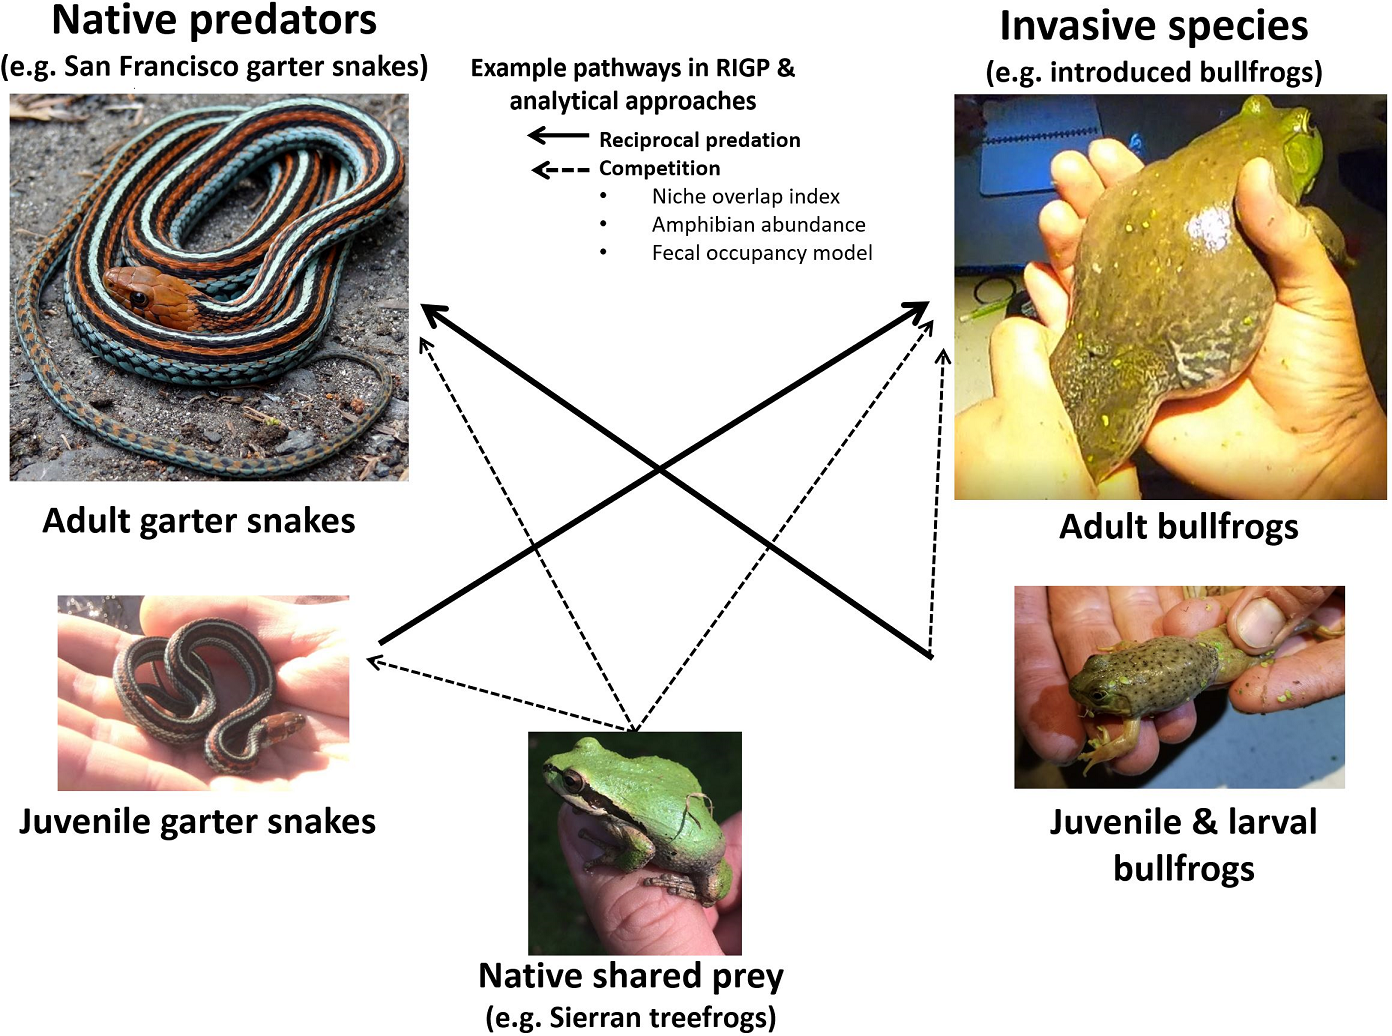 Study system description and research methods. A partial interaction web of how reciprocal intraguild predation (RIGP) can occur between San Francisco
garter snakes, bullfrogs, and native anurans. Dashed and solid arrows represent the types of interactions.<br />Photo by: Richard Kim